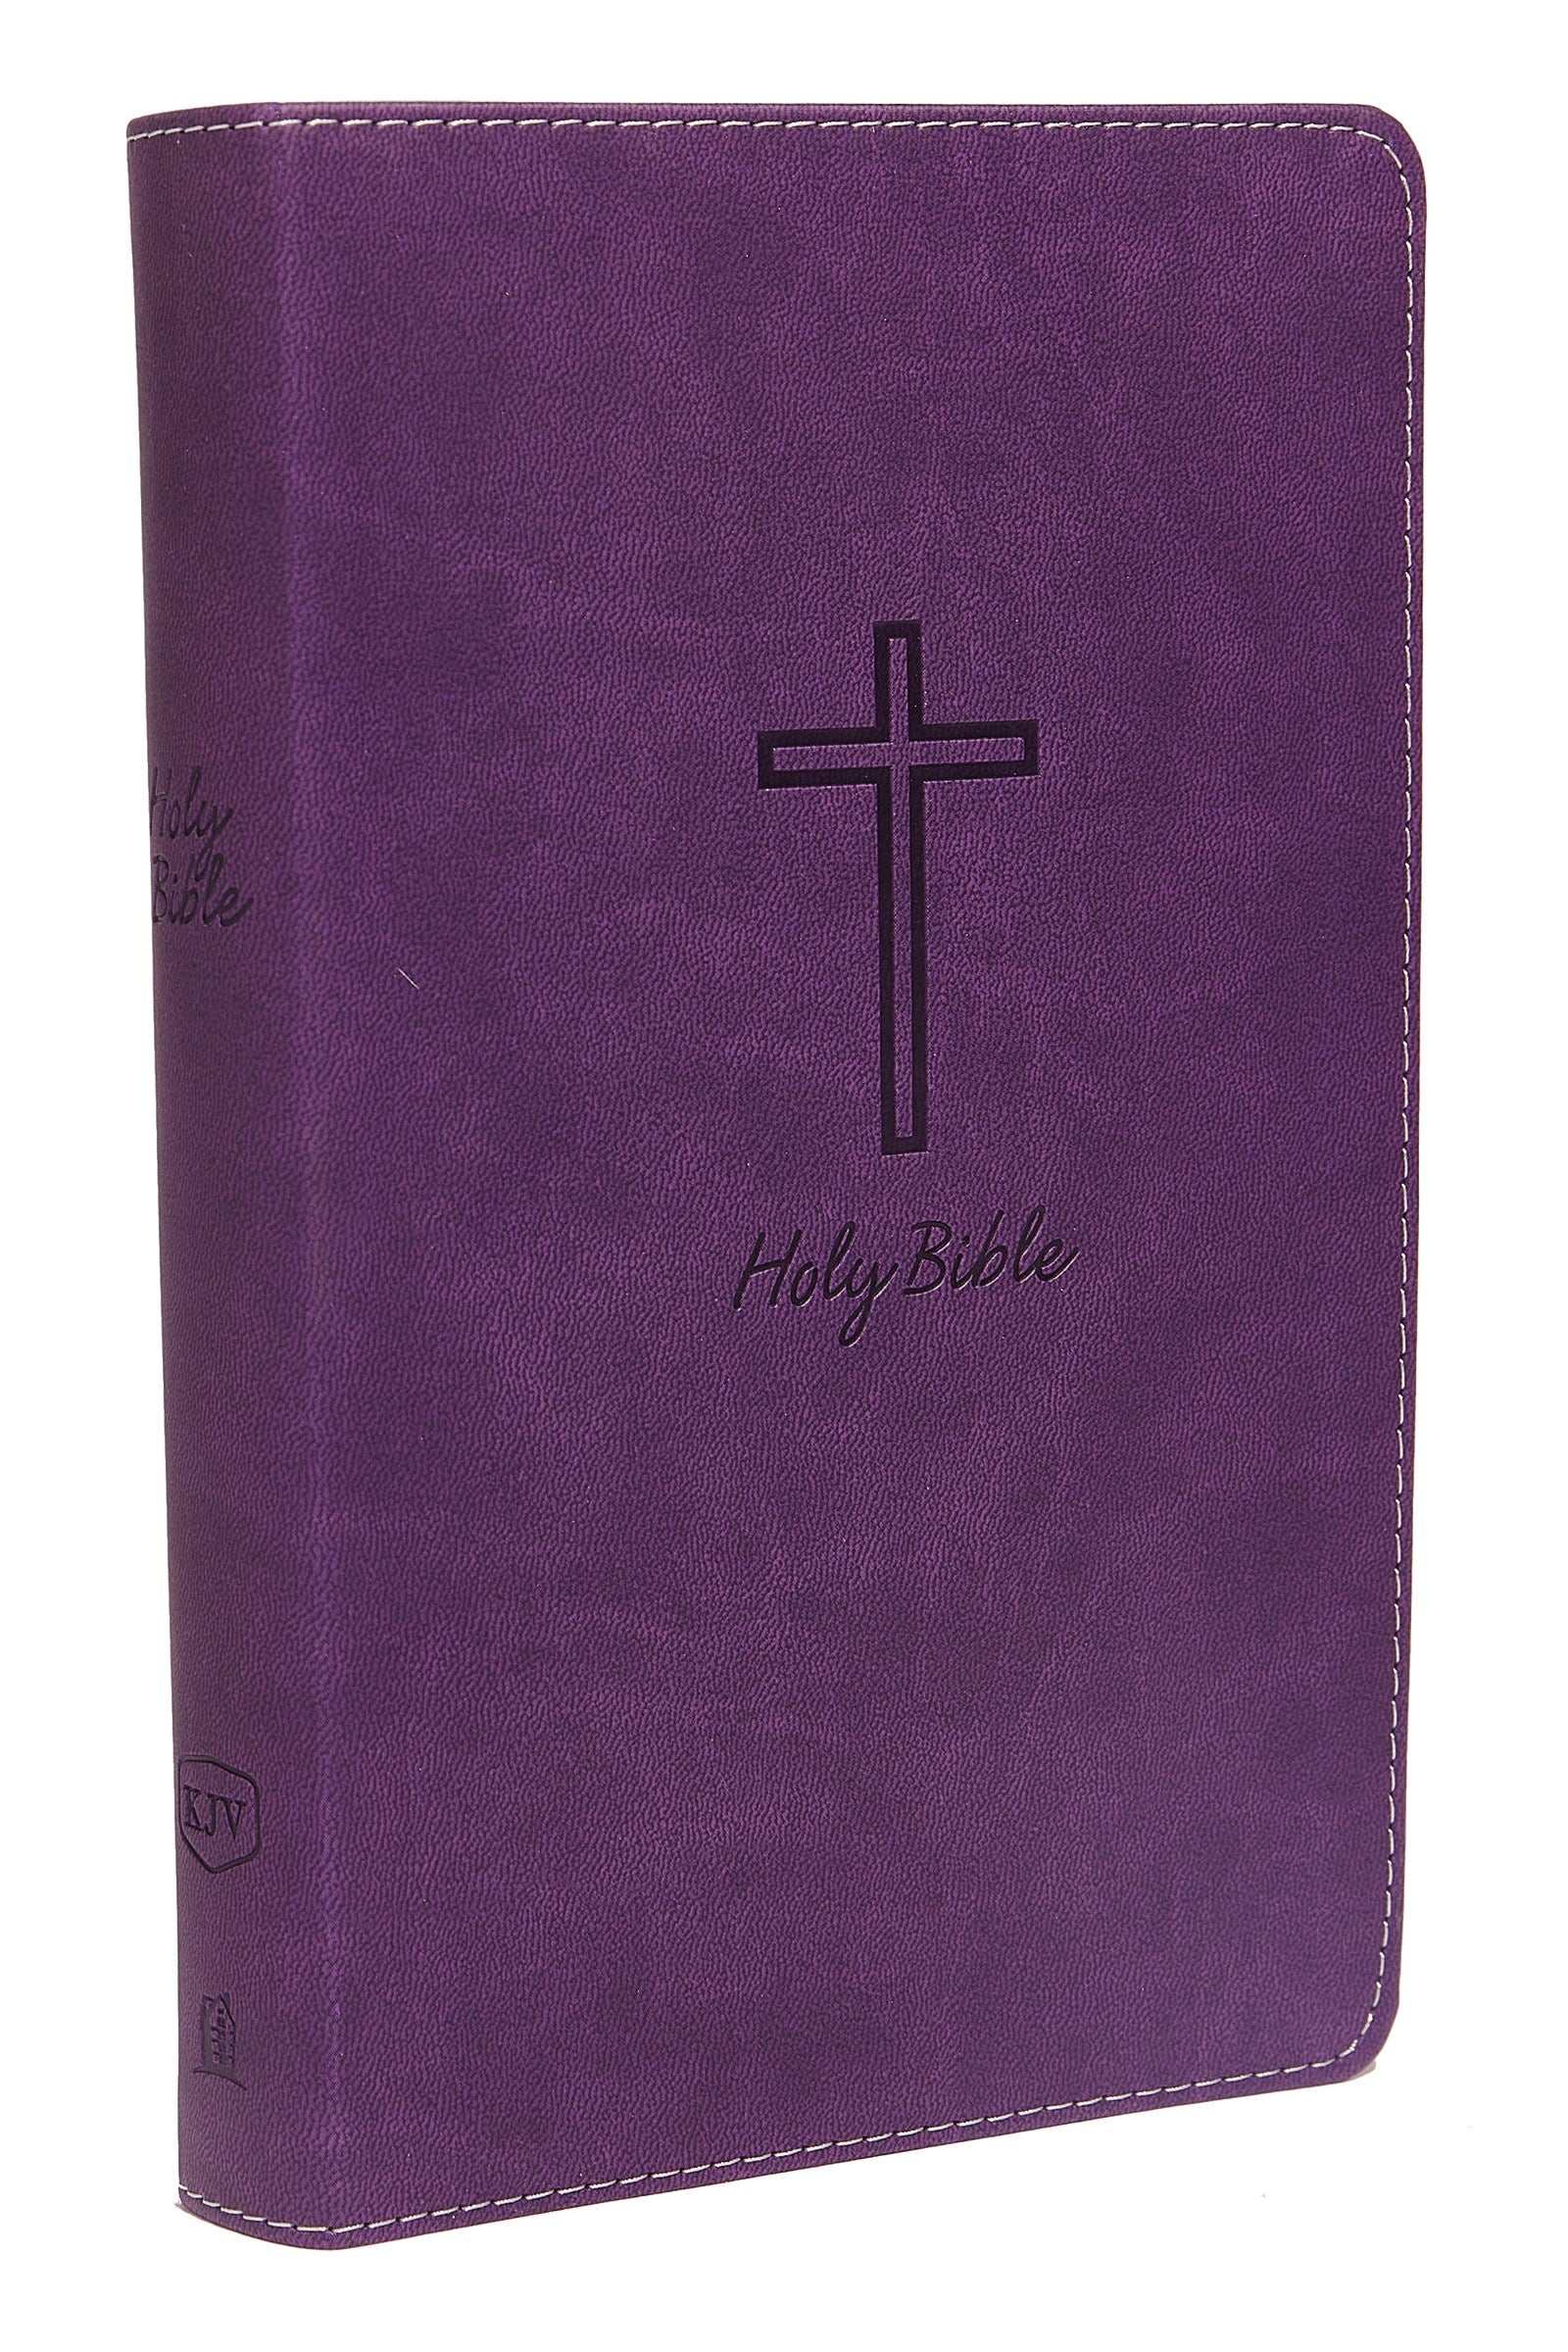 Seed of Abraham Christian Bookstore - (In)Courage - KJV Deluxe Gift Bible (Comfort Print)-Purple Leathersoft